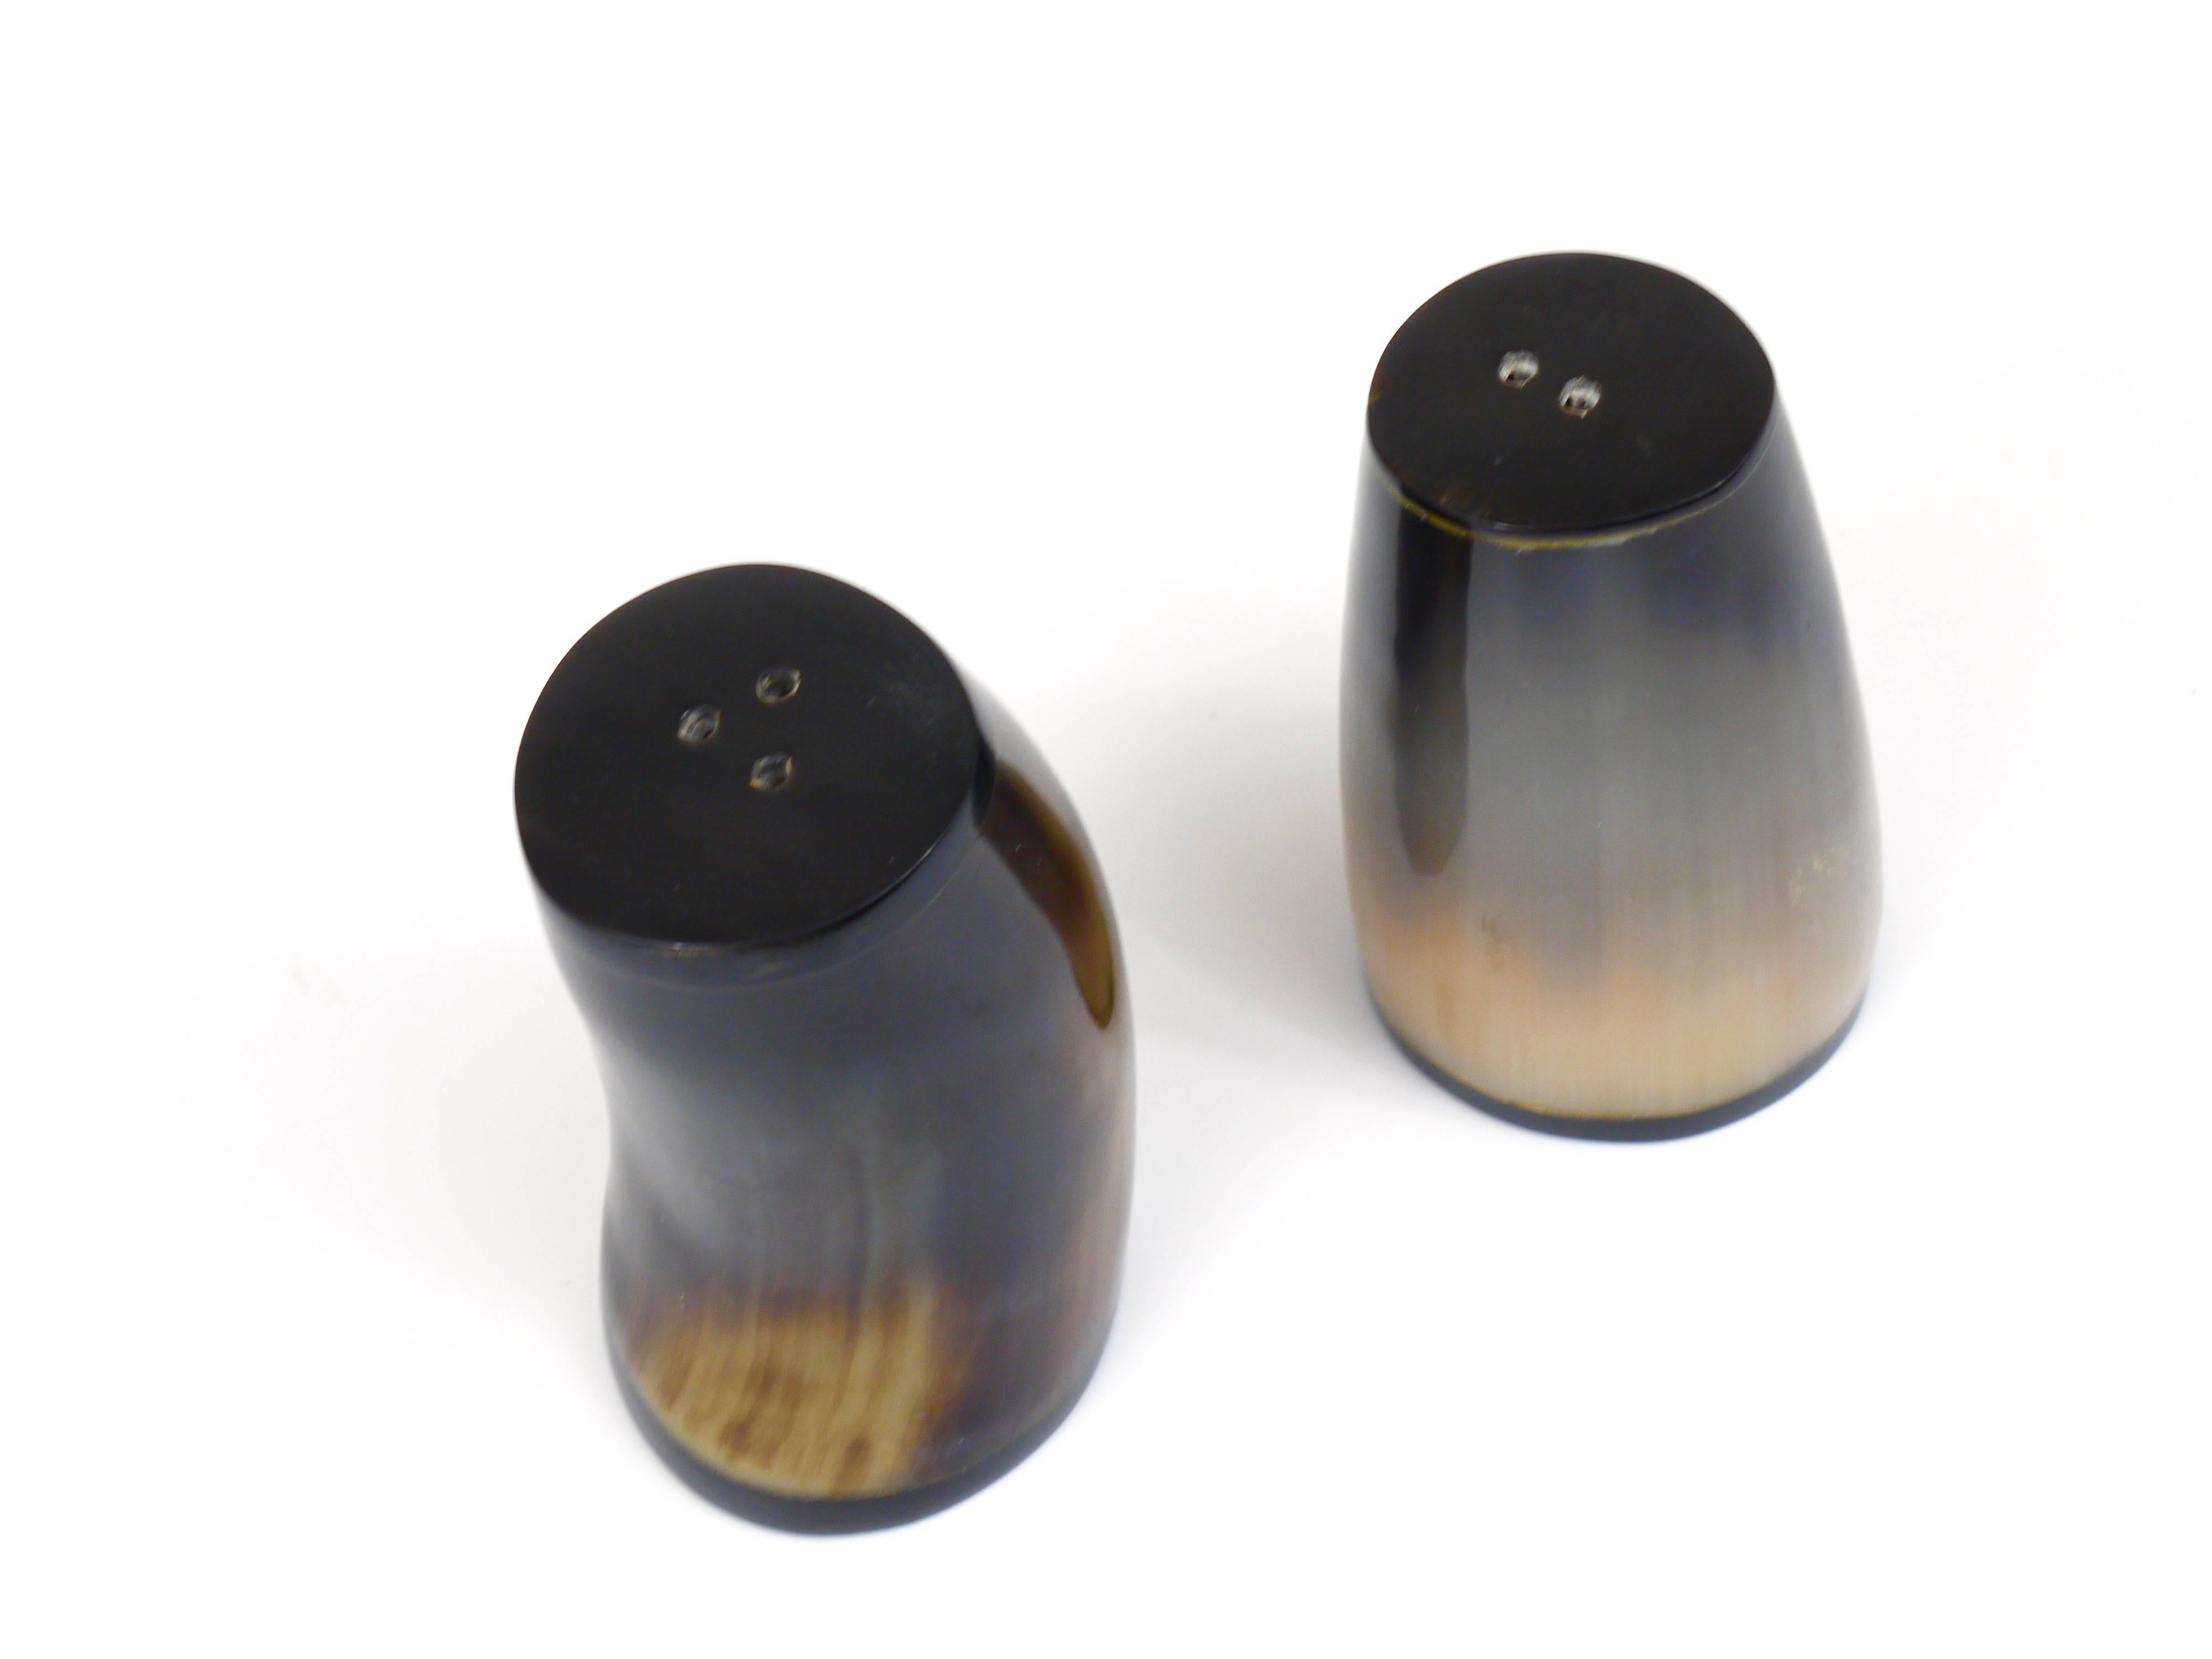 A pair of beautiful salt and pepper shakers, made of cow horn. Designed and executed by Carl Aubock, Vienna, Austria. In excellent condition.